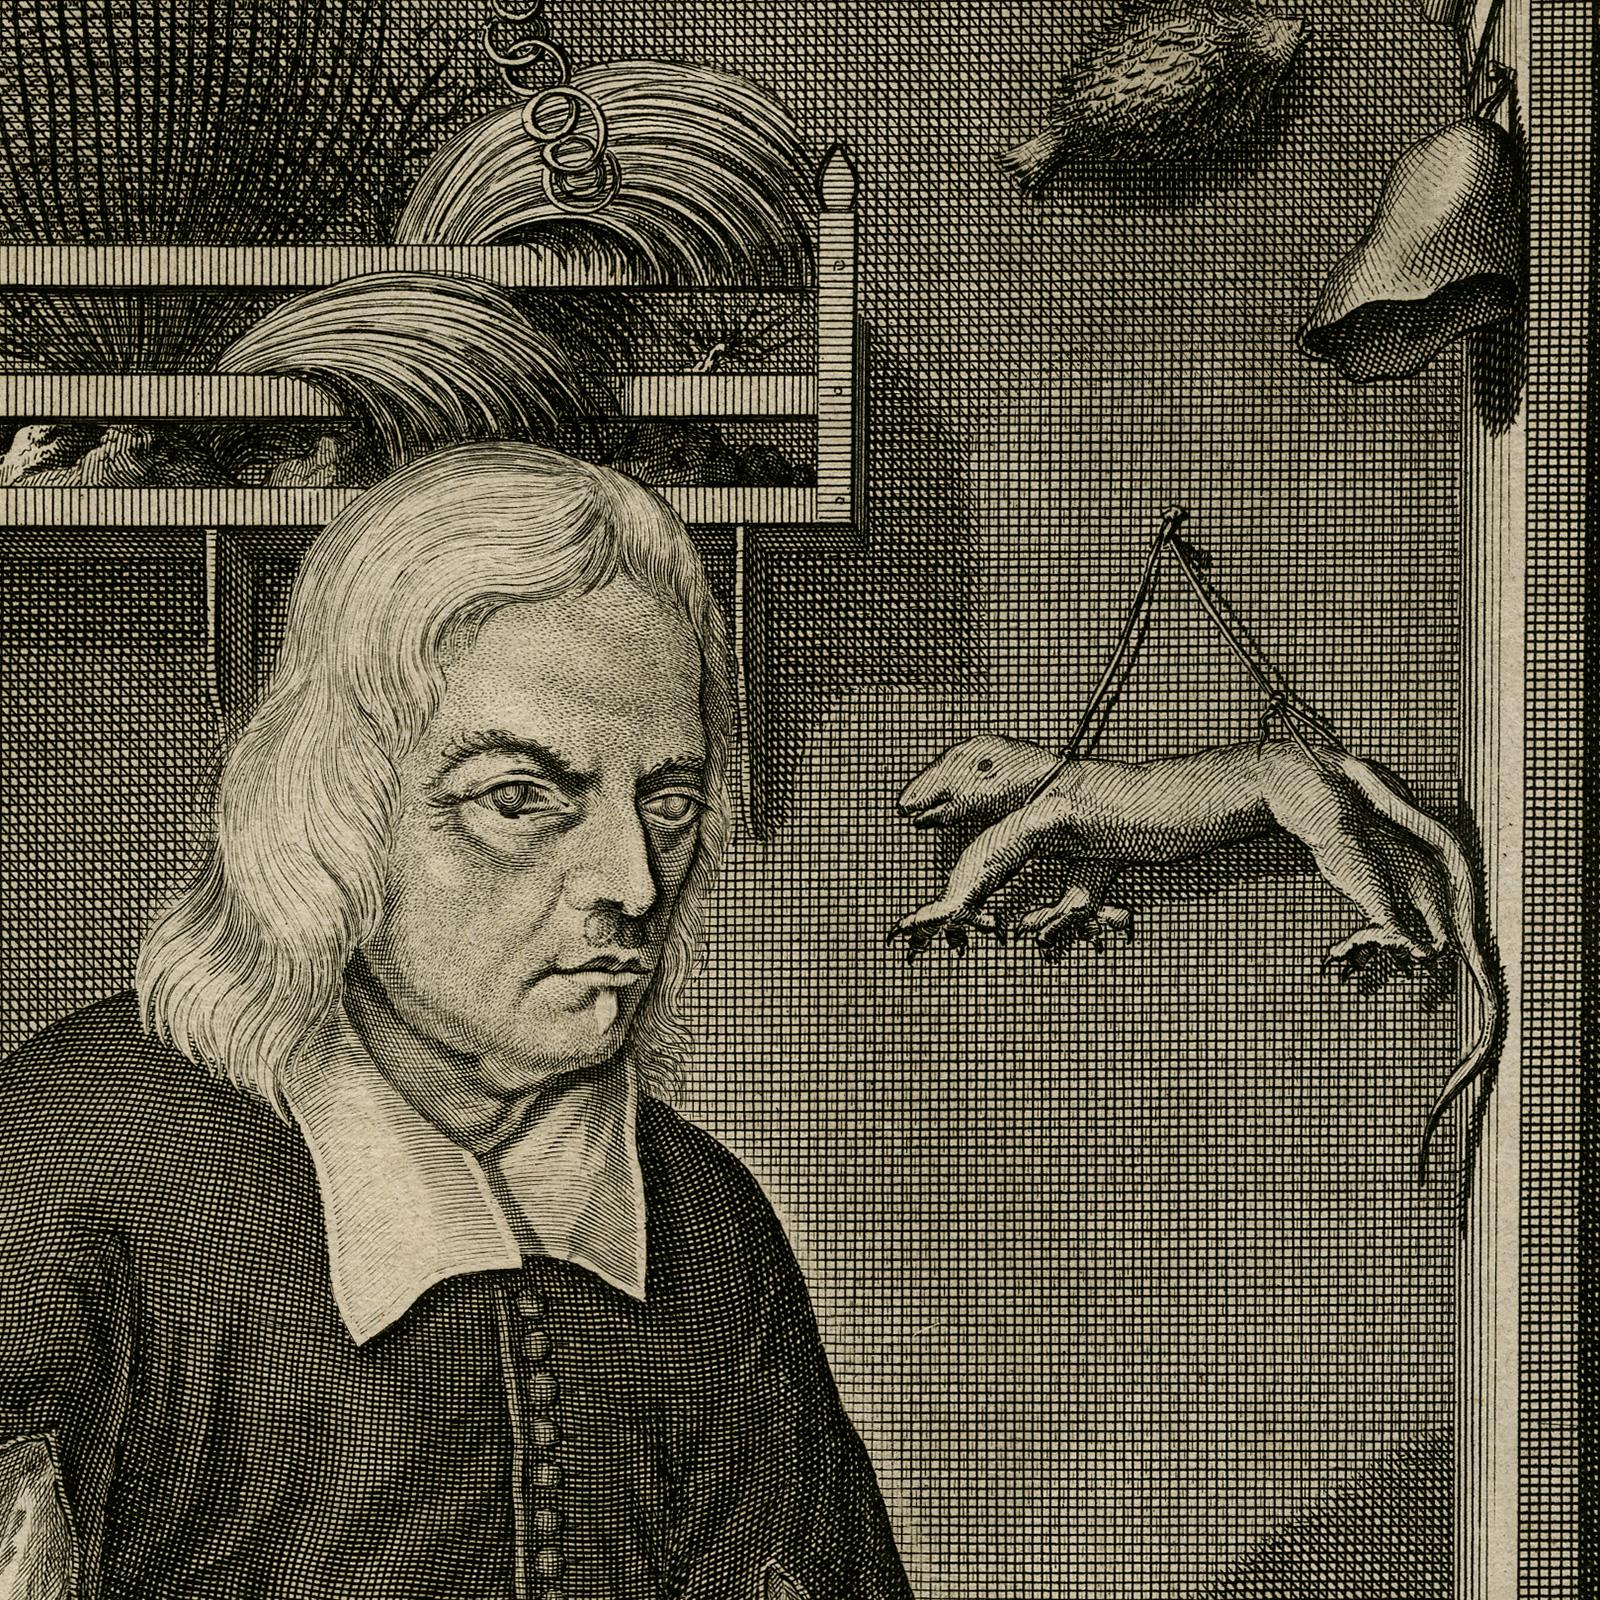 Portrait from Ambonian Cabinet of Curiosities by Rumphius - Engraving - 18th c. - Print by Jorg Eberhardt Rumph